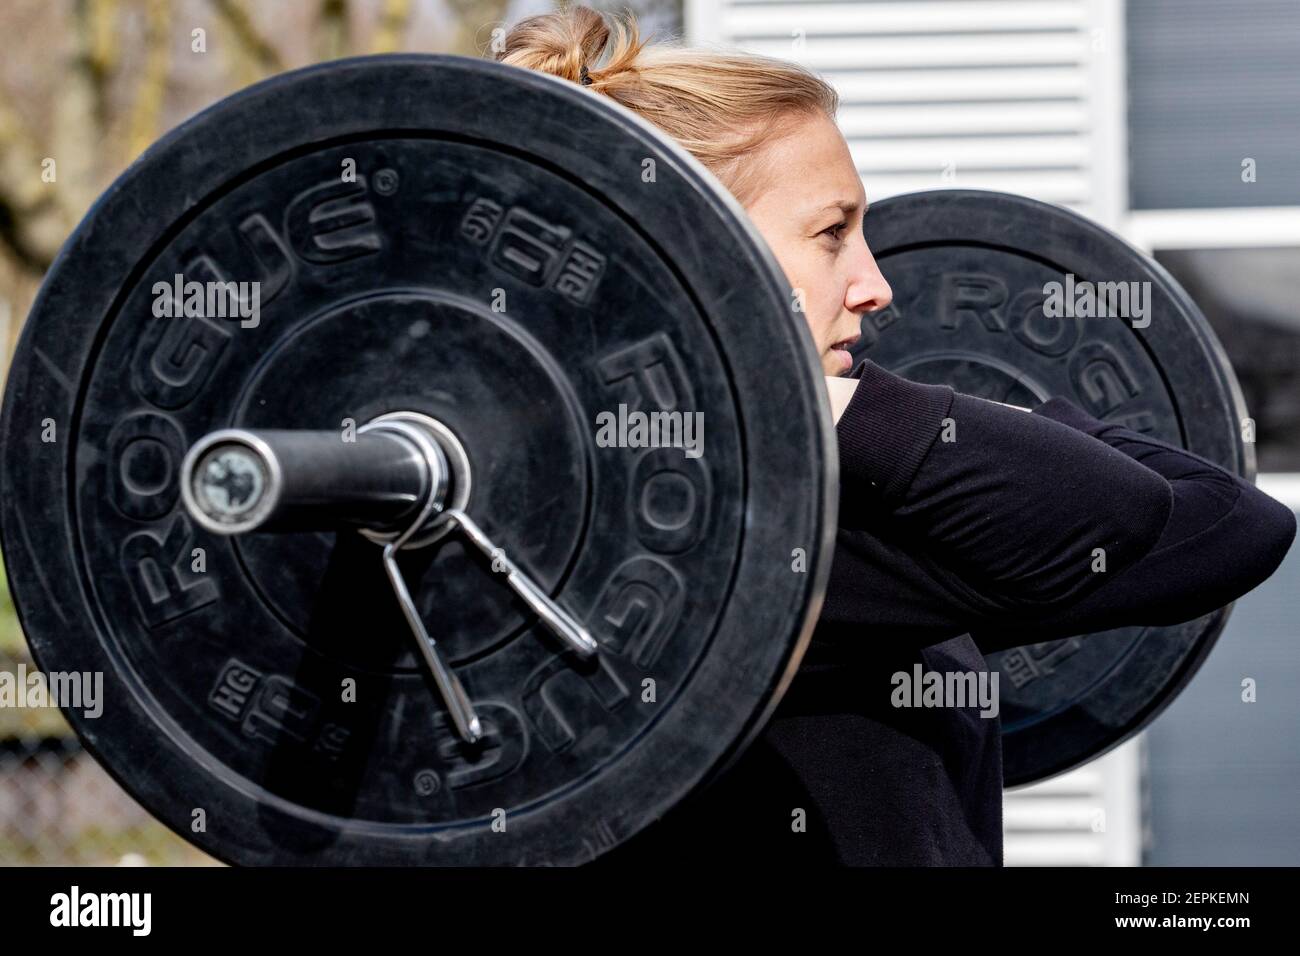 DEN BOSCH, NETHERLANDS - FEBRUARY 27: A woman is seen lifting weights outdoor on February 27, 2021 in Den Bosch, Netherlands. More than 300 gyms nationwide are protesting against the strict lockdowns measures that keep them closed. (Photo by Niels Wenstedt/BSR Agency/Alamy Live News) Stock Photo